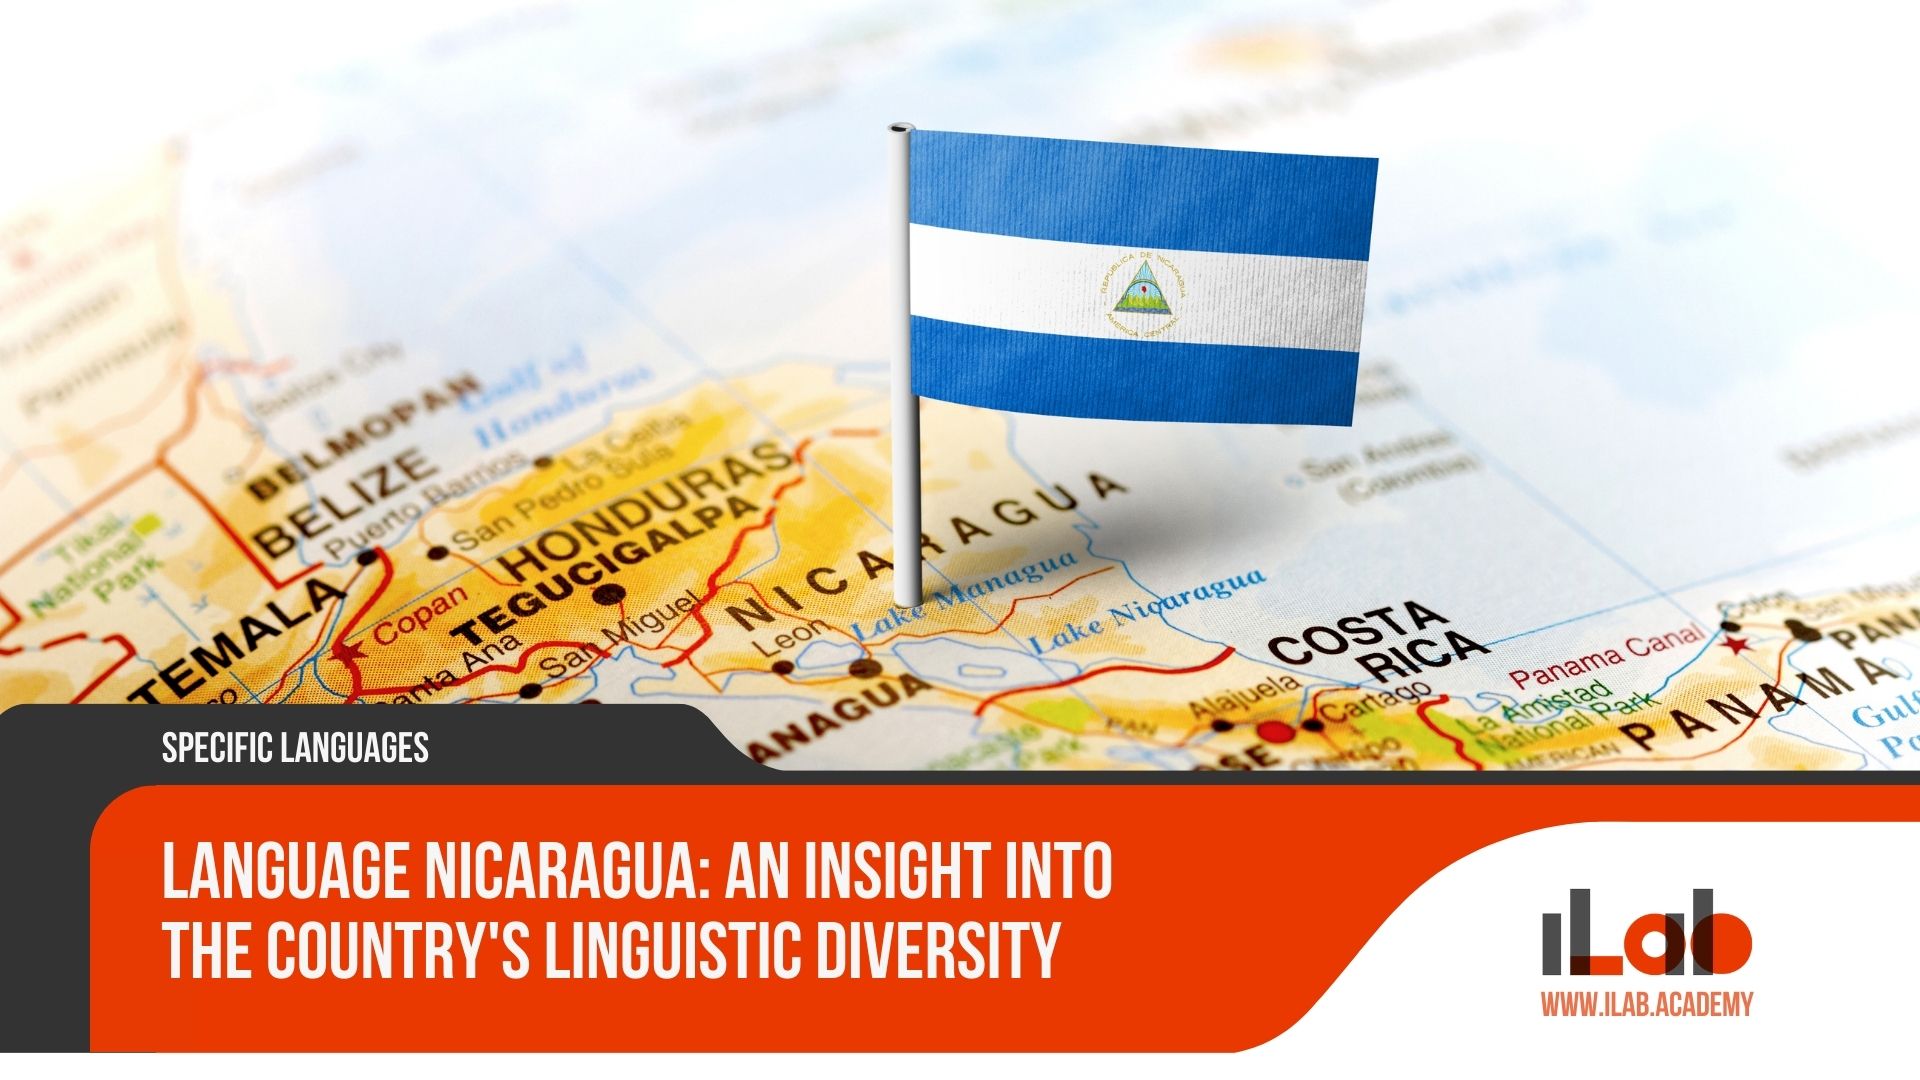 Language Nicaragua: an Insight Into the Country's Linguistic Diversity